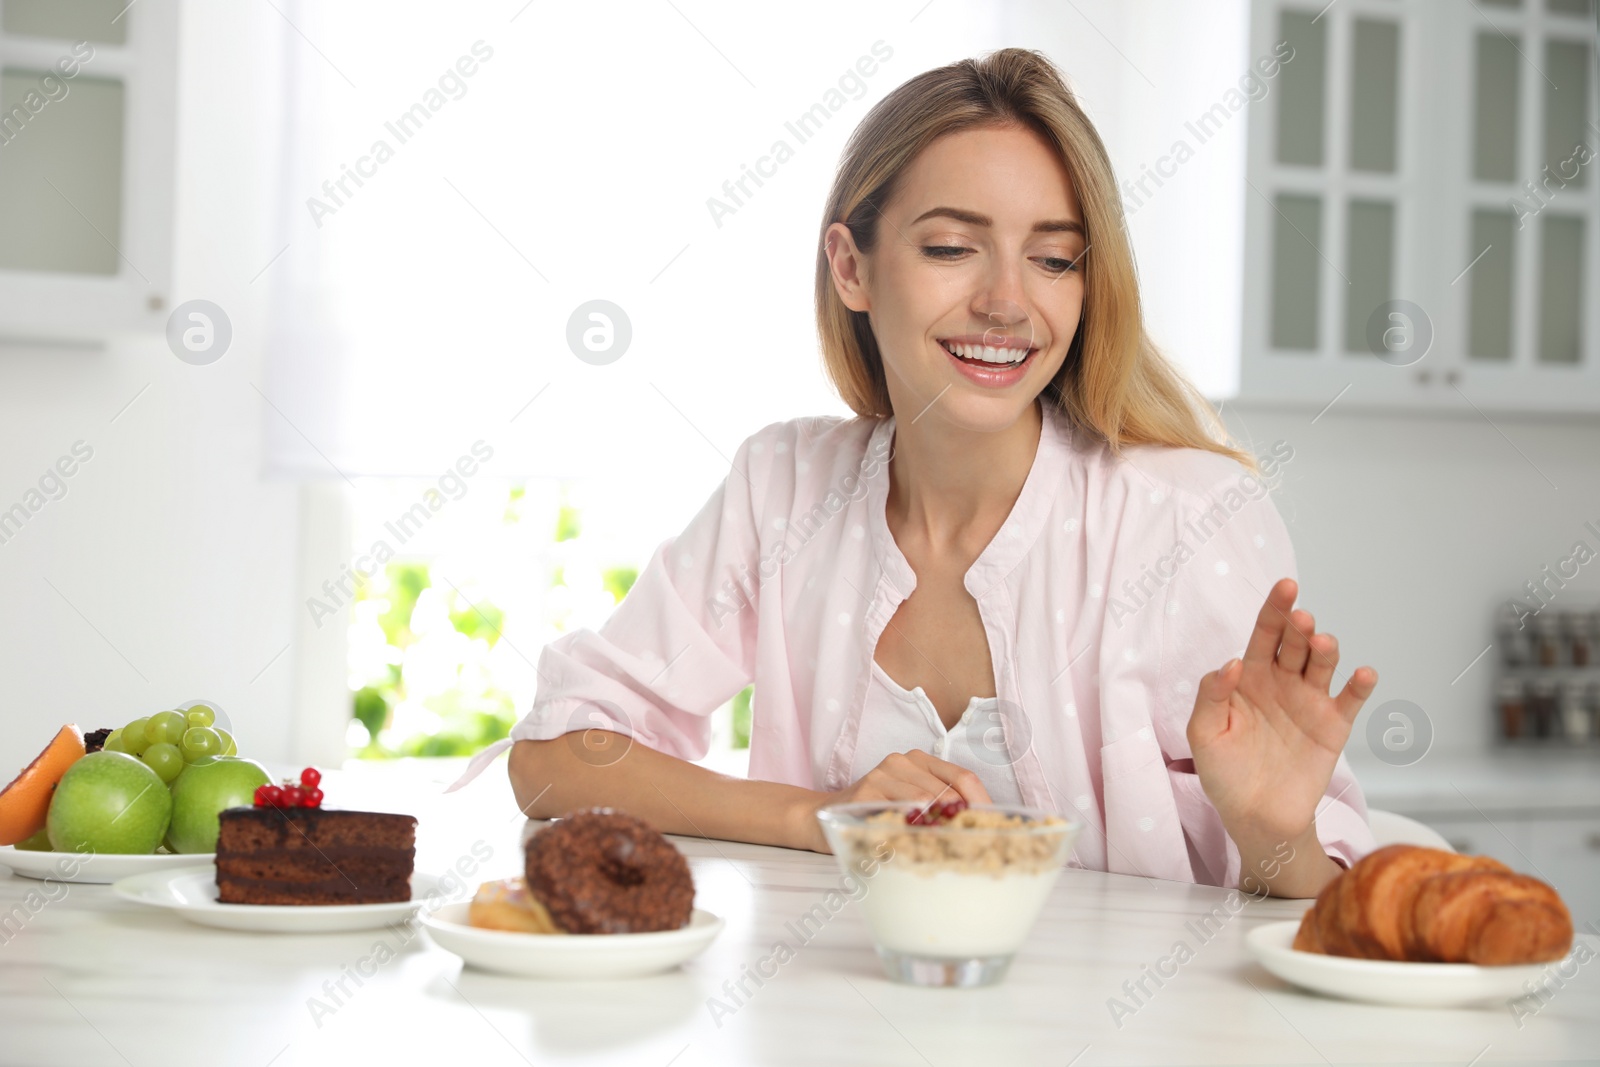 Photo of Woman choosing between sweets and healthy food at white table in kitchen